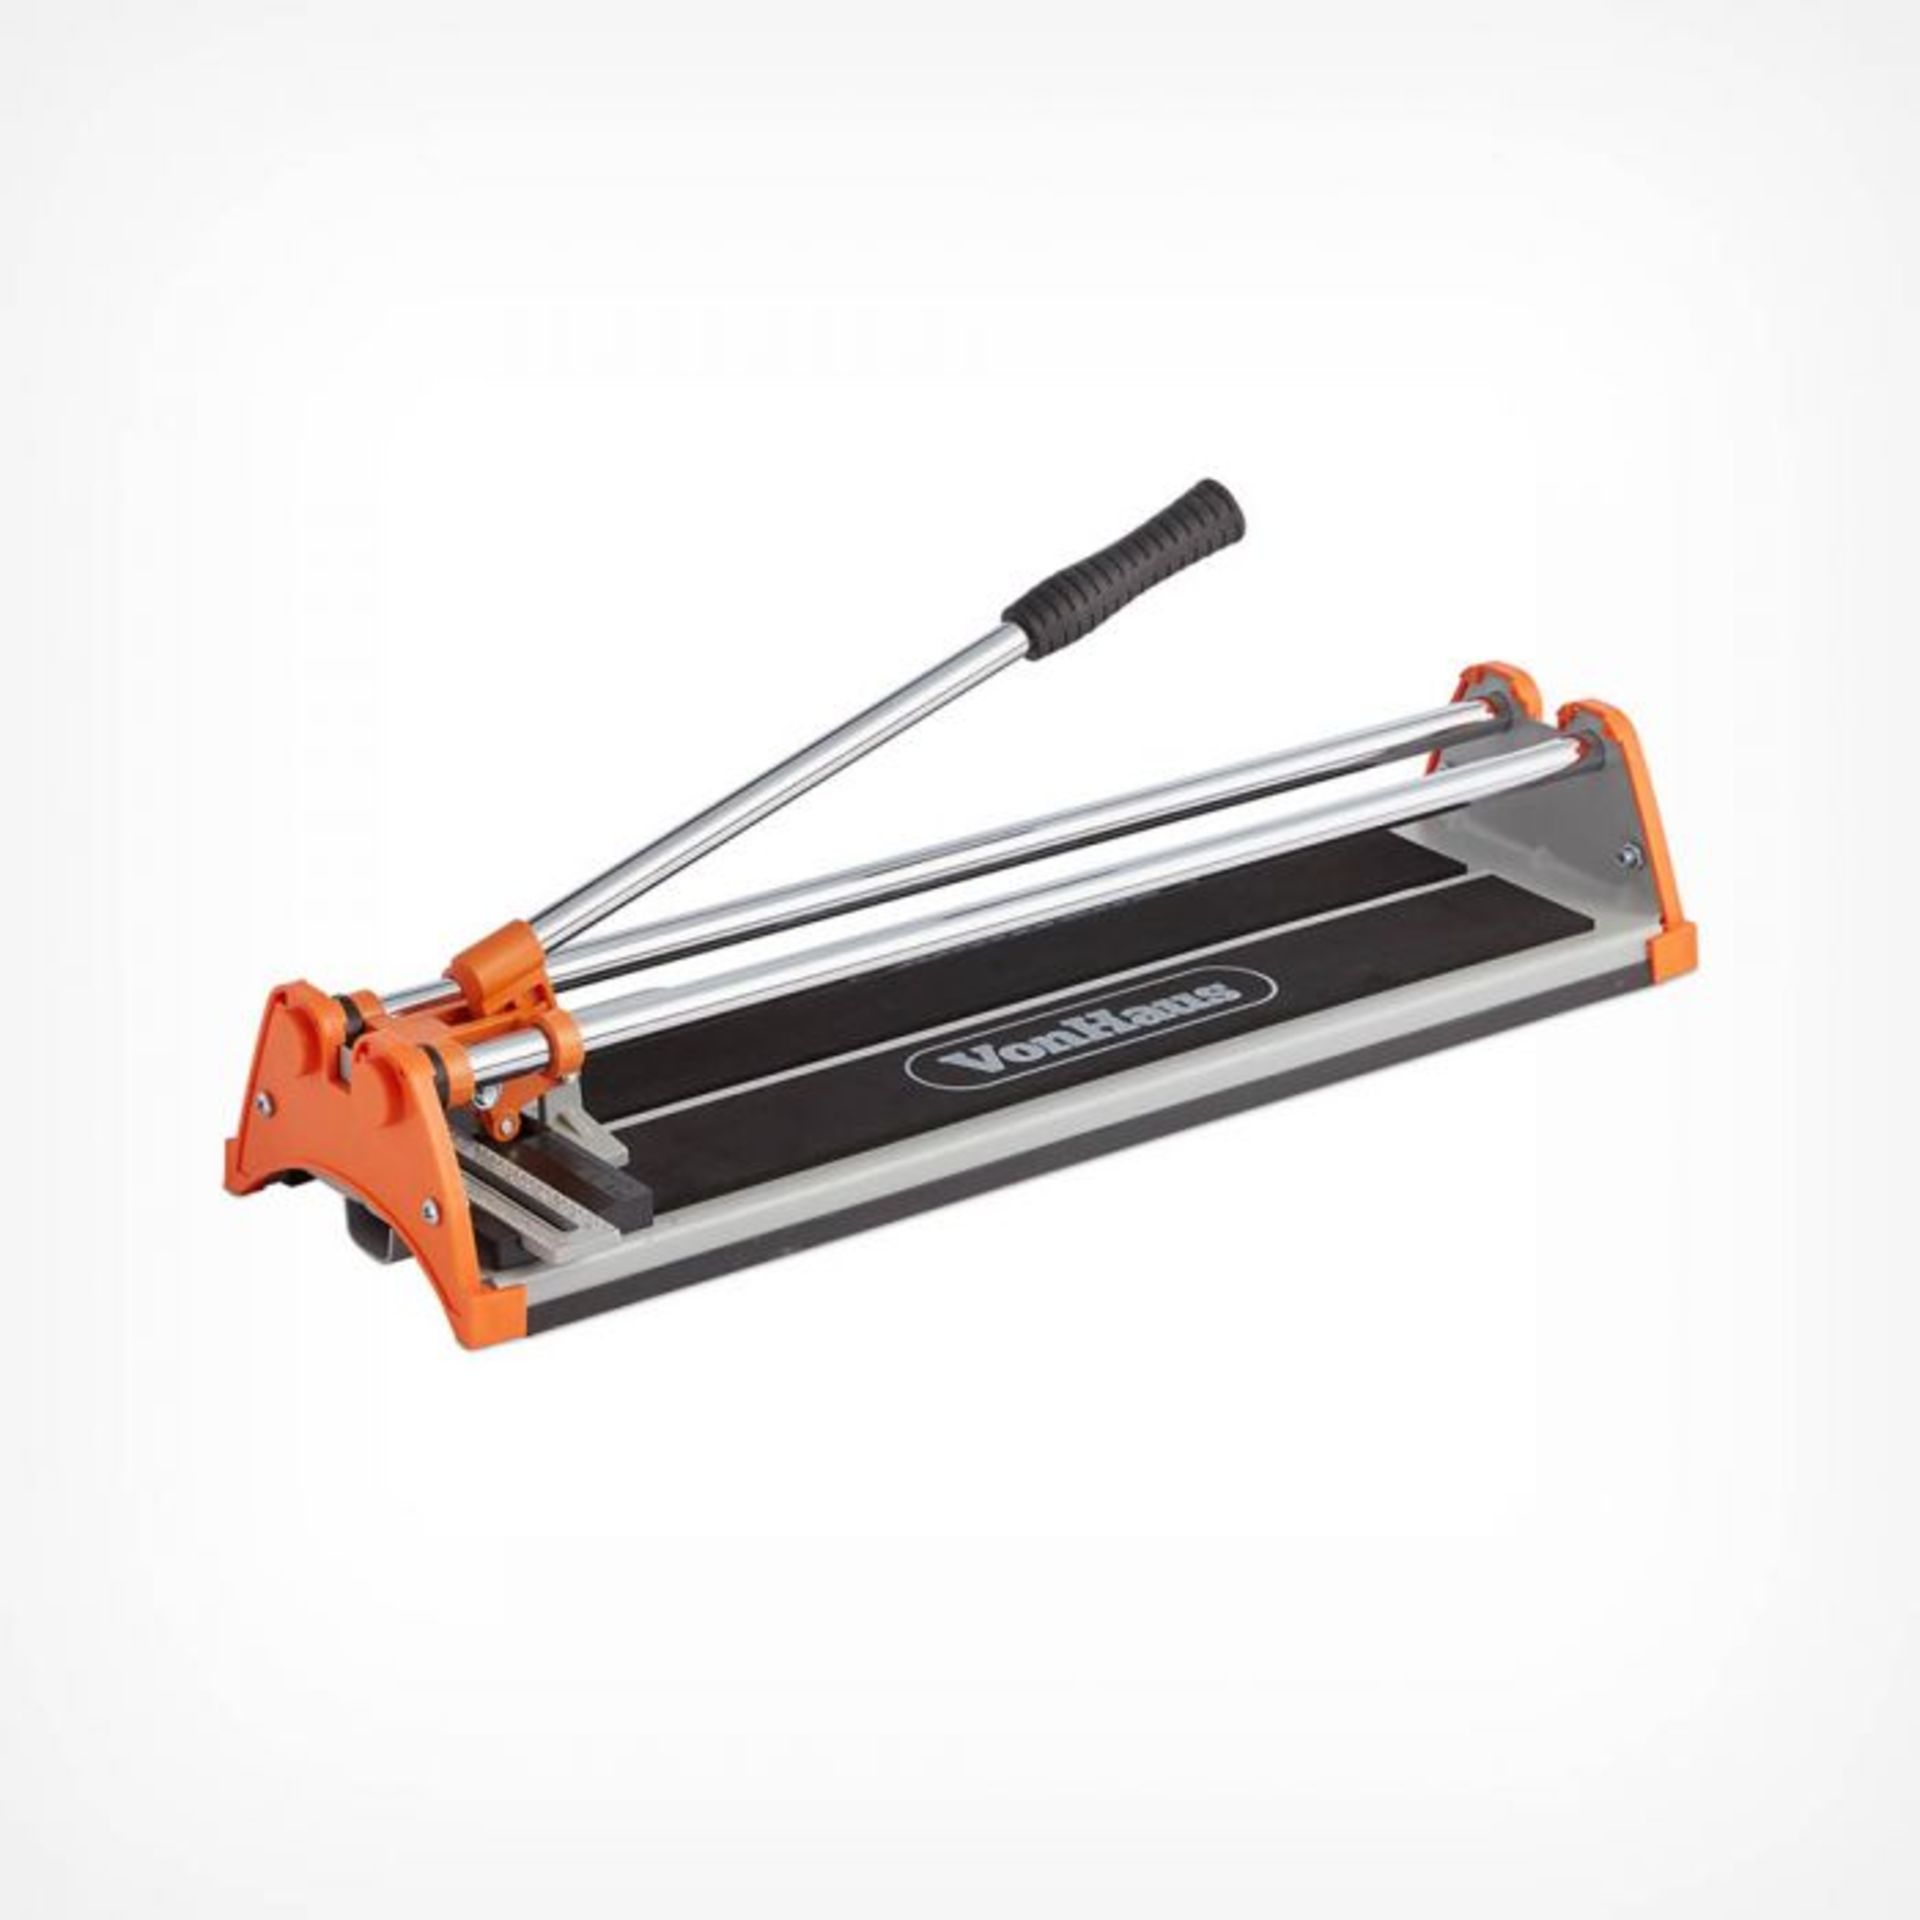 Manual Tile Cutter 430mm. With its compact size, intuitive design and simple operation, this